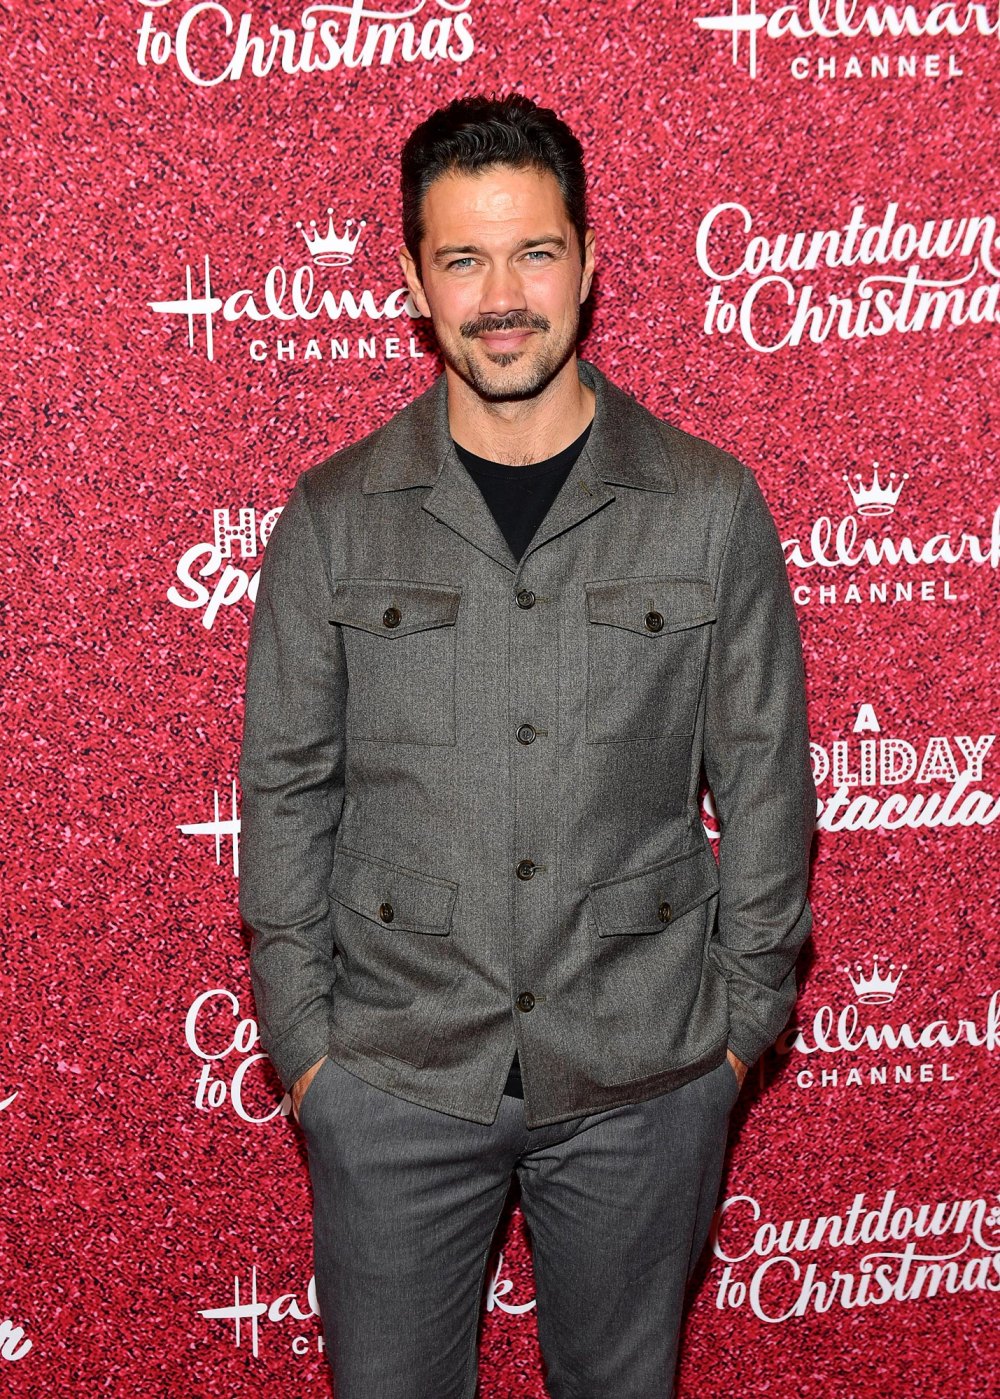 Hallmark Star Ryan Paevey Might Take an Acting Break After Getting a ‘Bitter Taste’ From Recent Gigs 585